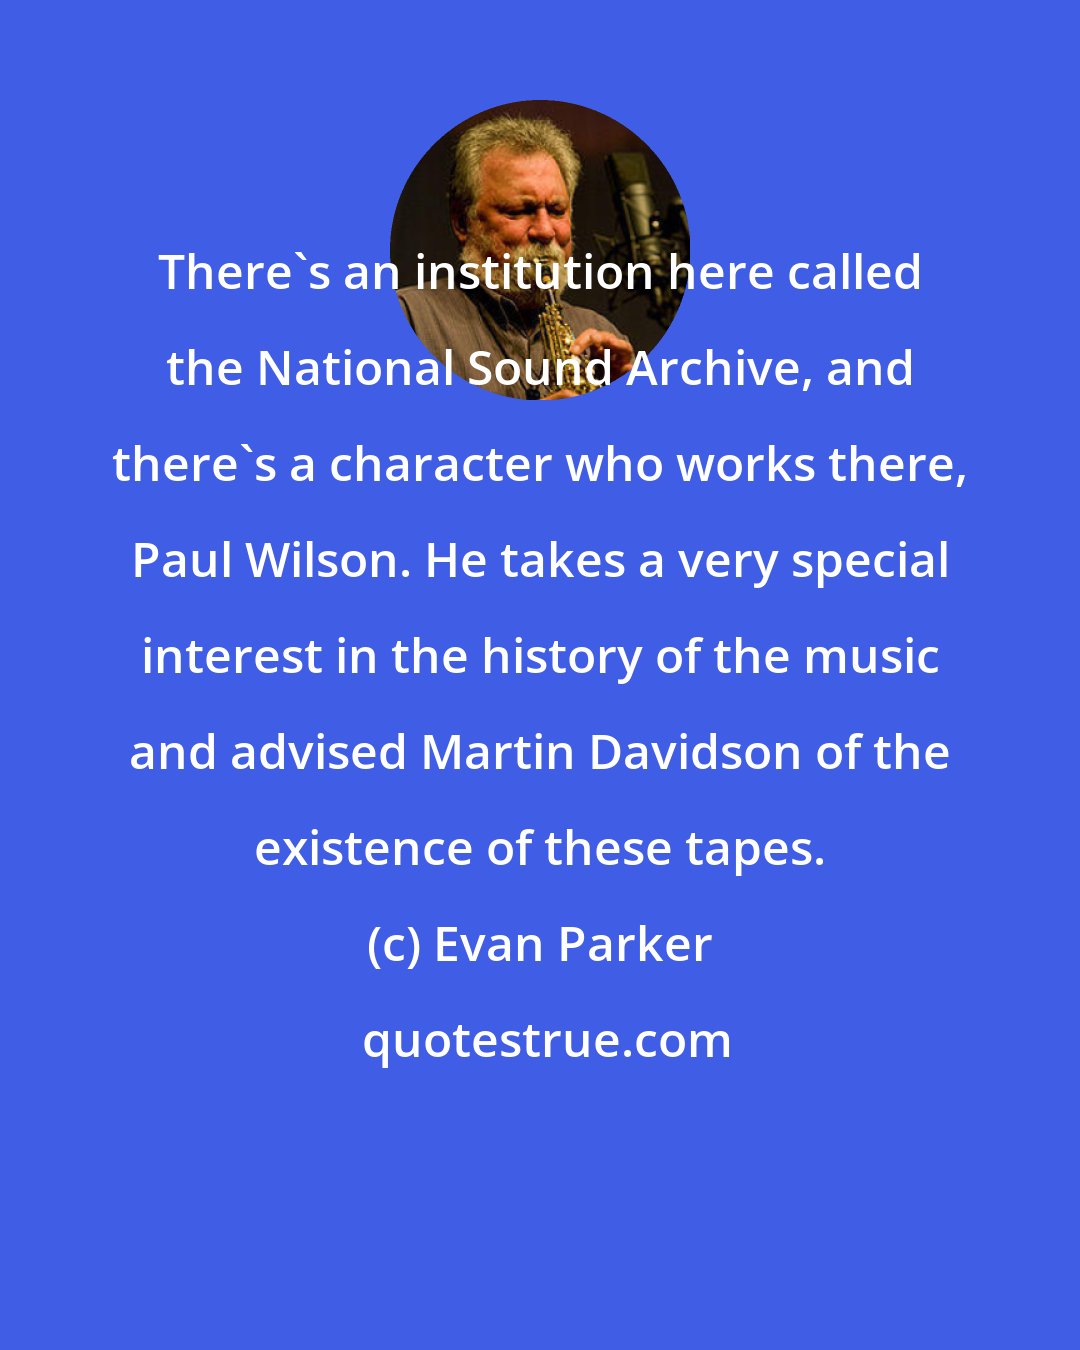 Evan Parker: There's an institution here called the National Sound Archive, and there's a character who works there, Paul Wilson. He takes a very special interest in the history of the music and advised Martin Davidson of the existence of these tapes.